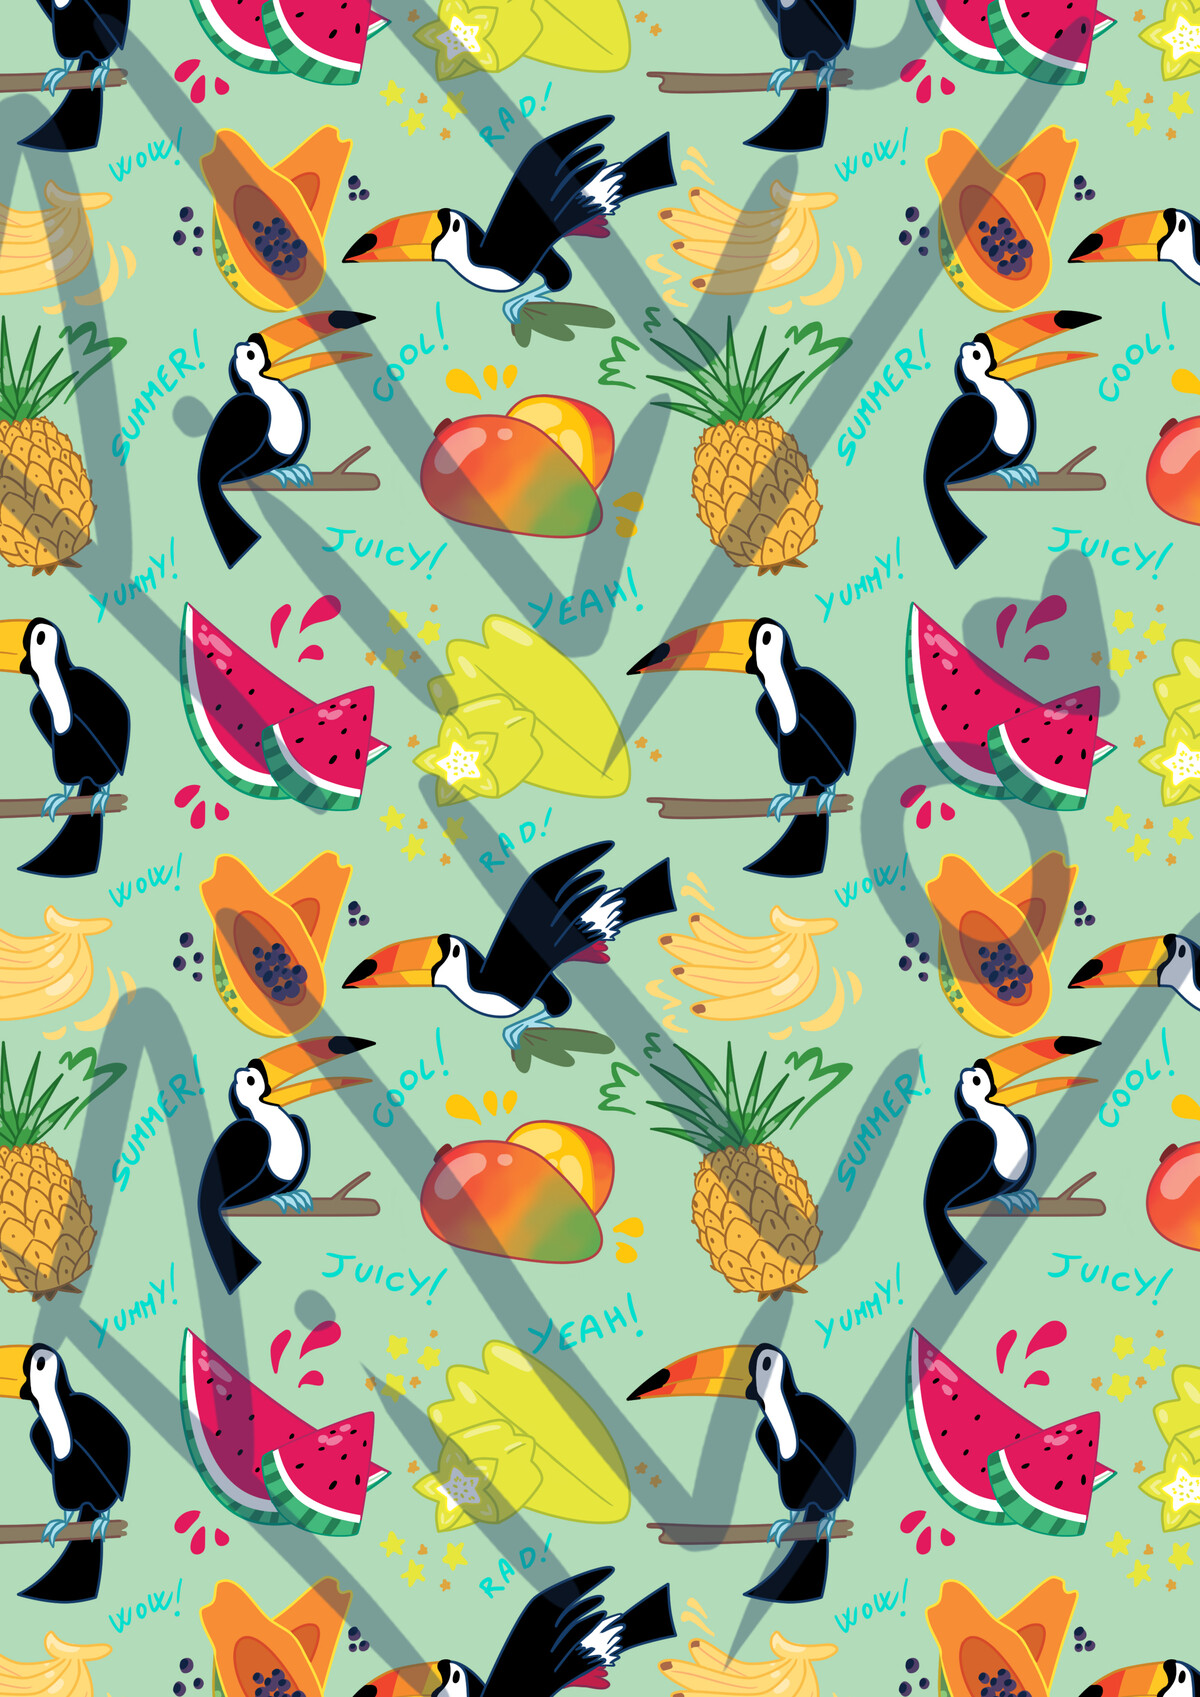 Pattern I (Tropical).
A digital pattern featuring Toucans and tropical fruits, for a fresh summer vibe.